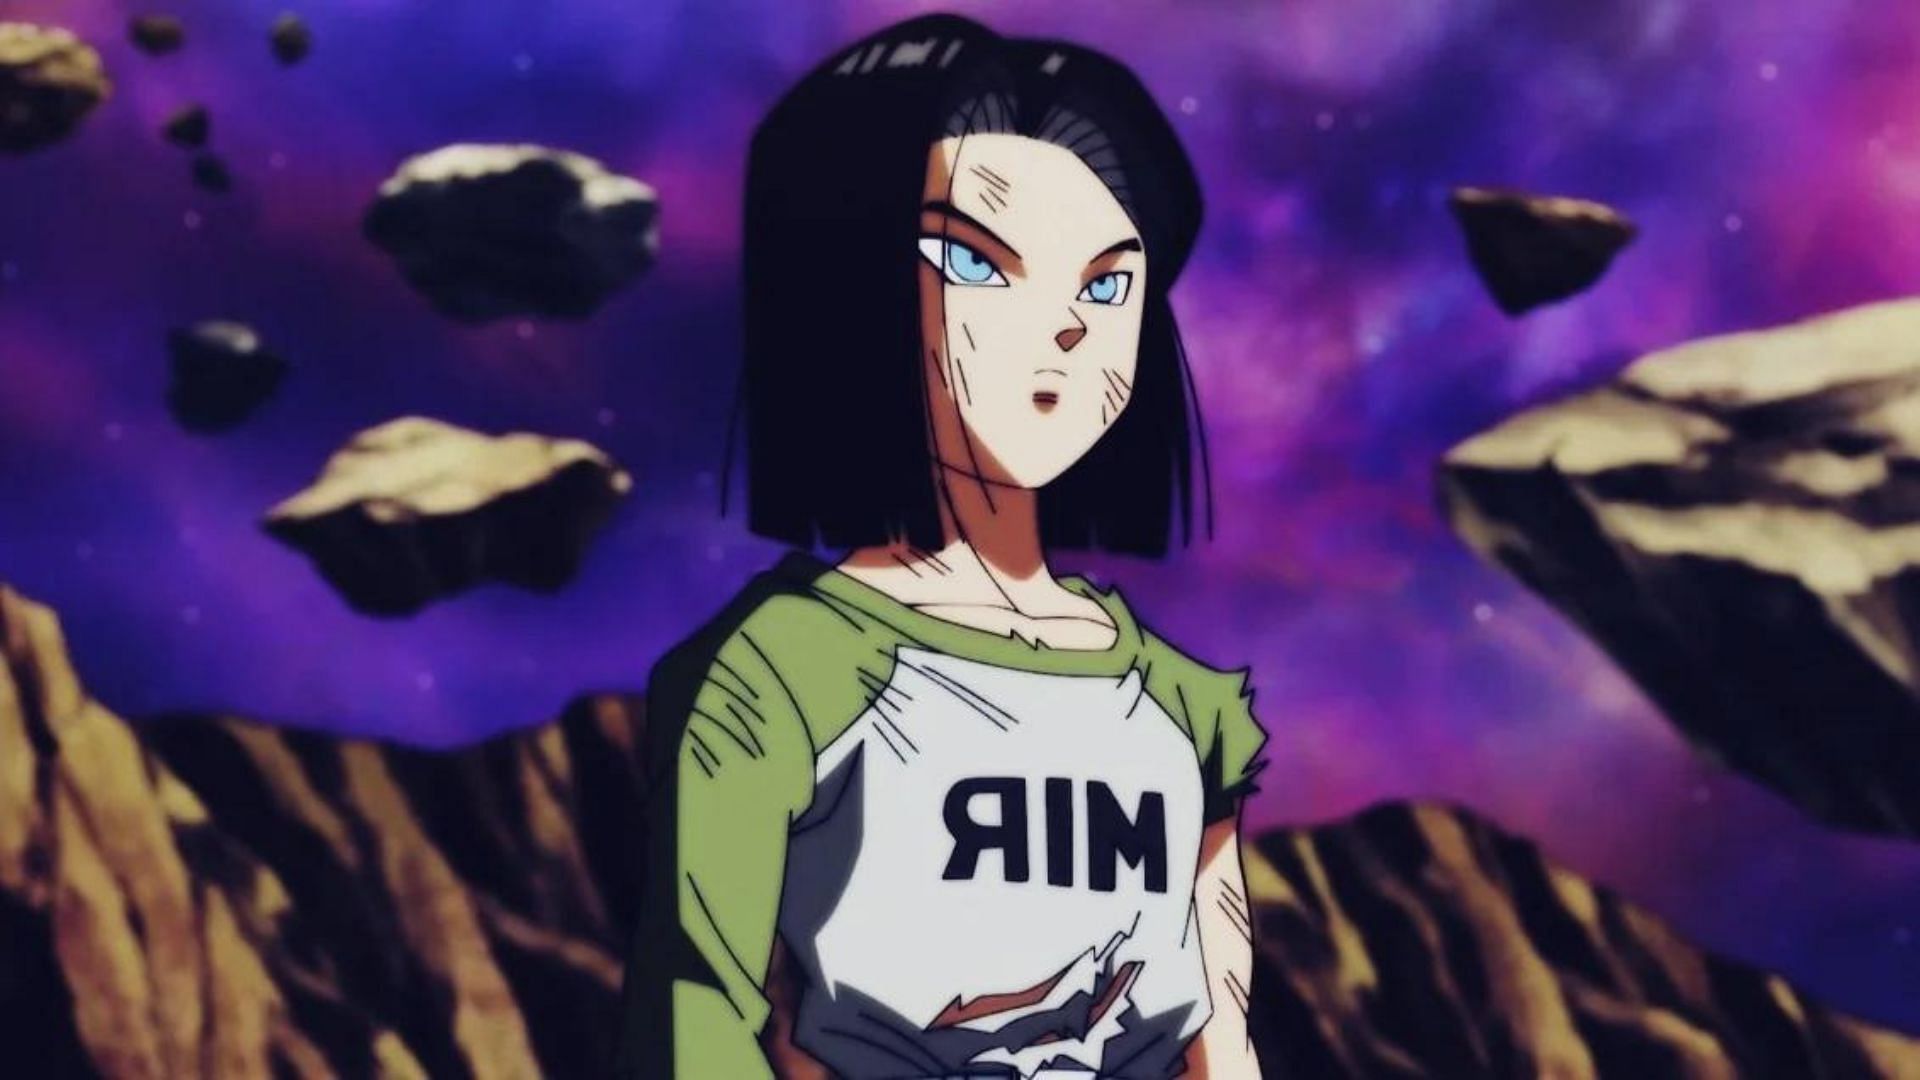 Android 17 as seen in the Dragon Ball Super anime (Image via Toei Animation)